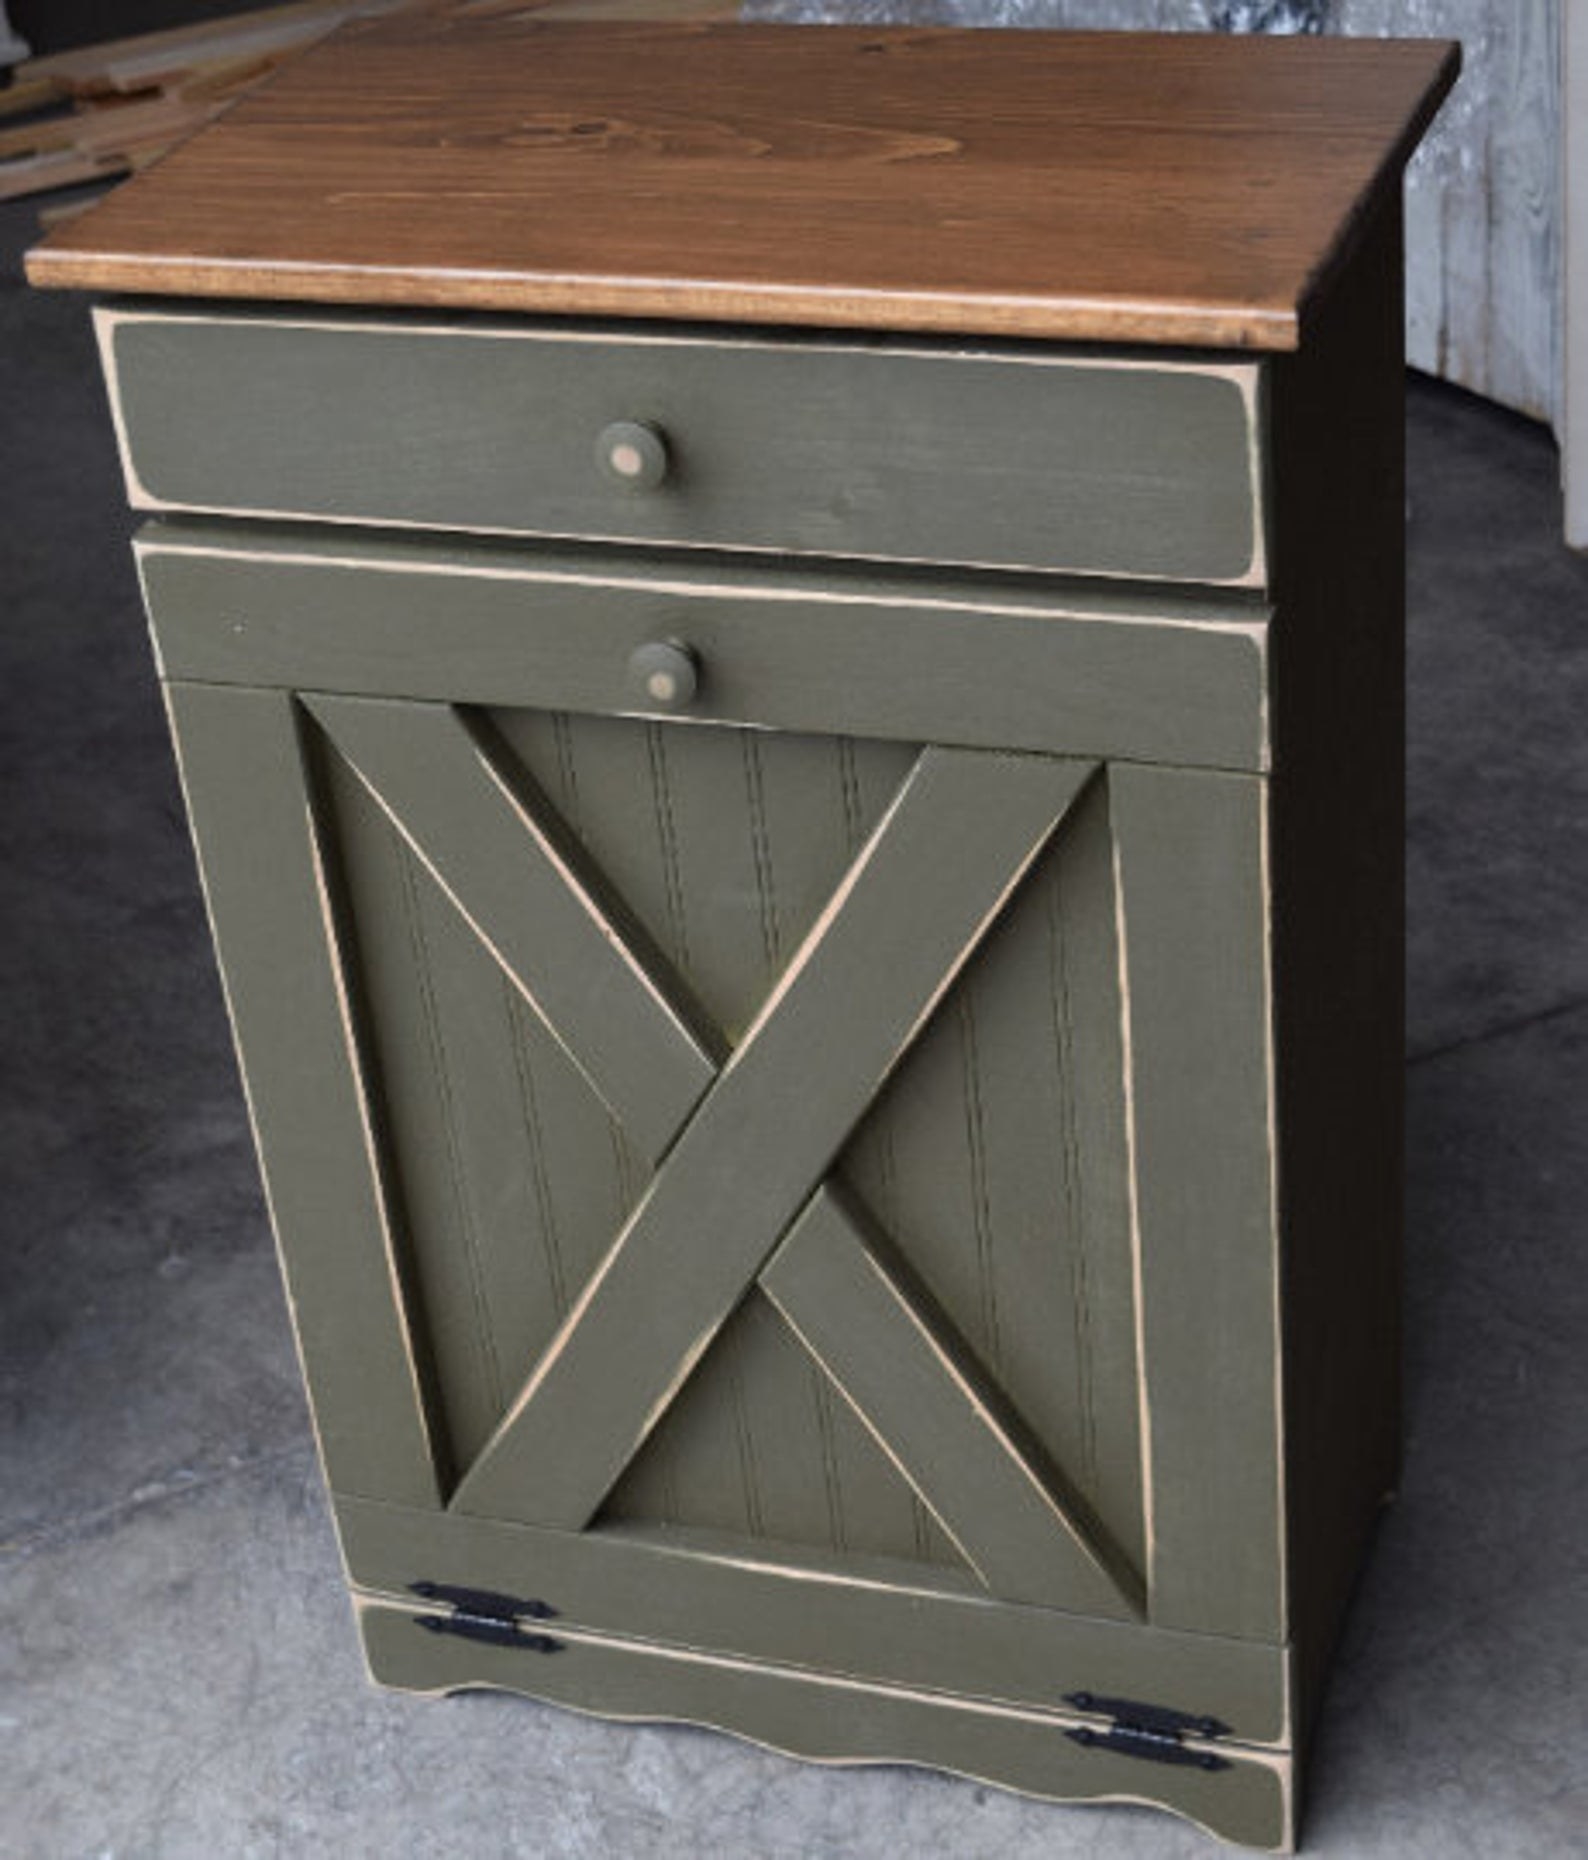 A wooden Tilt Out Trash Bin painted Antique White with Modern Walnut top.